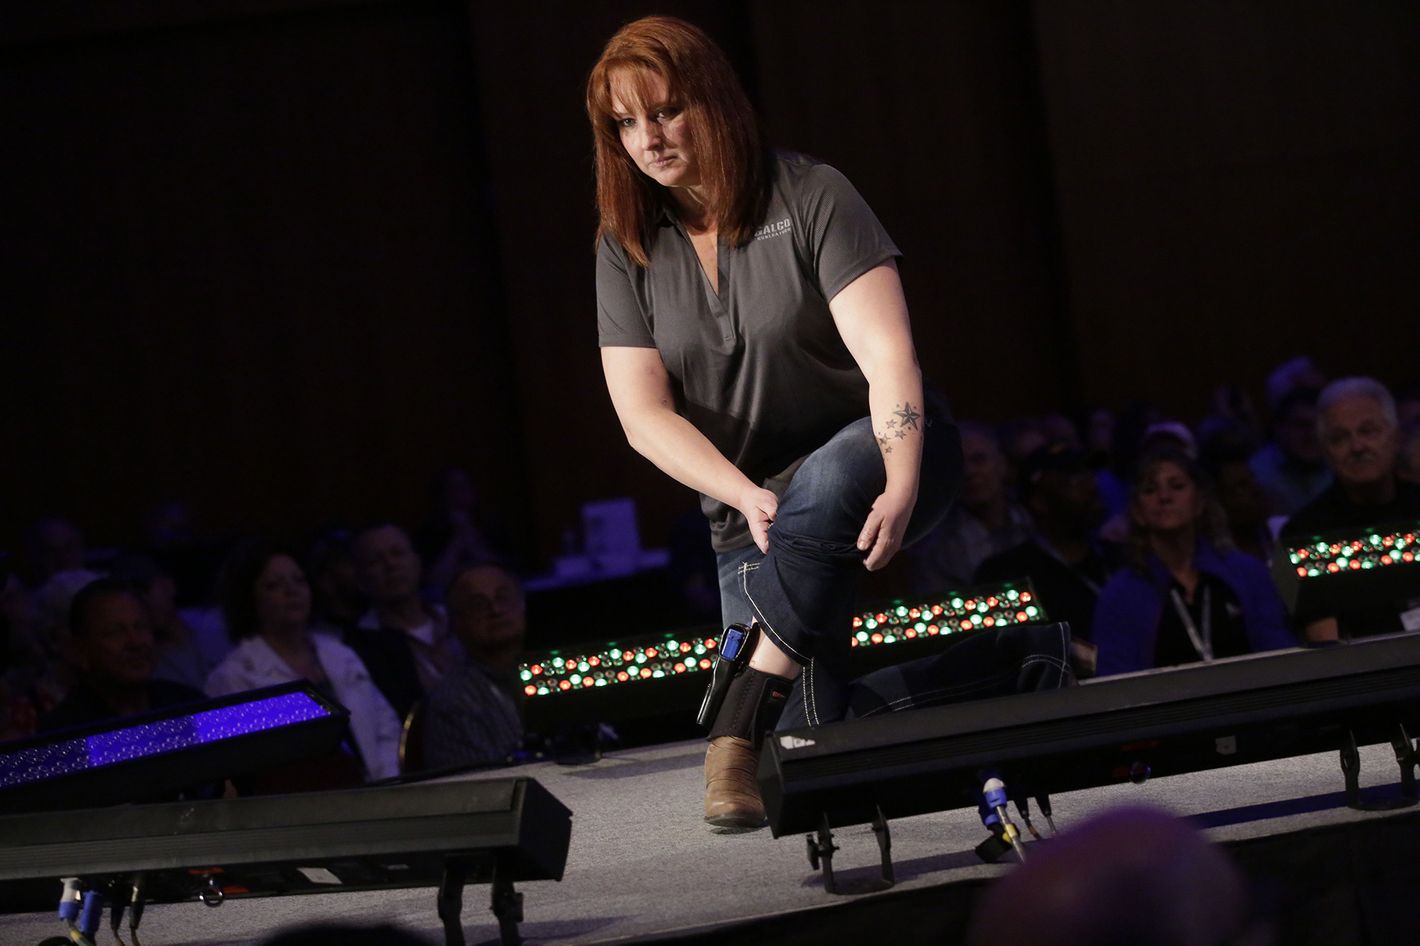 The NRA Just Held a Gun-Loving, Pistol-Packing Fashion Show